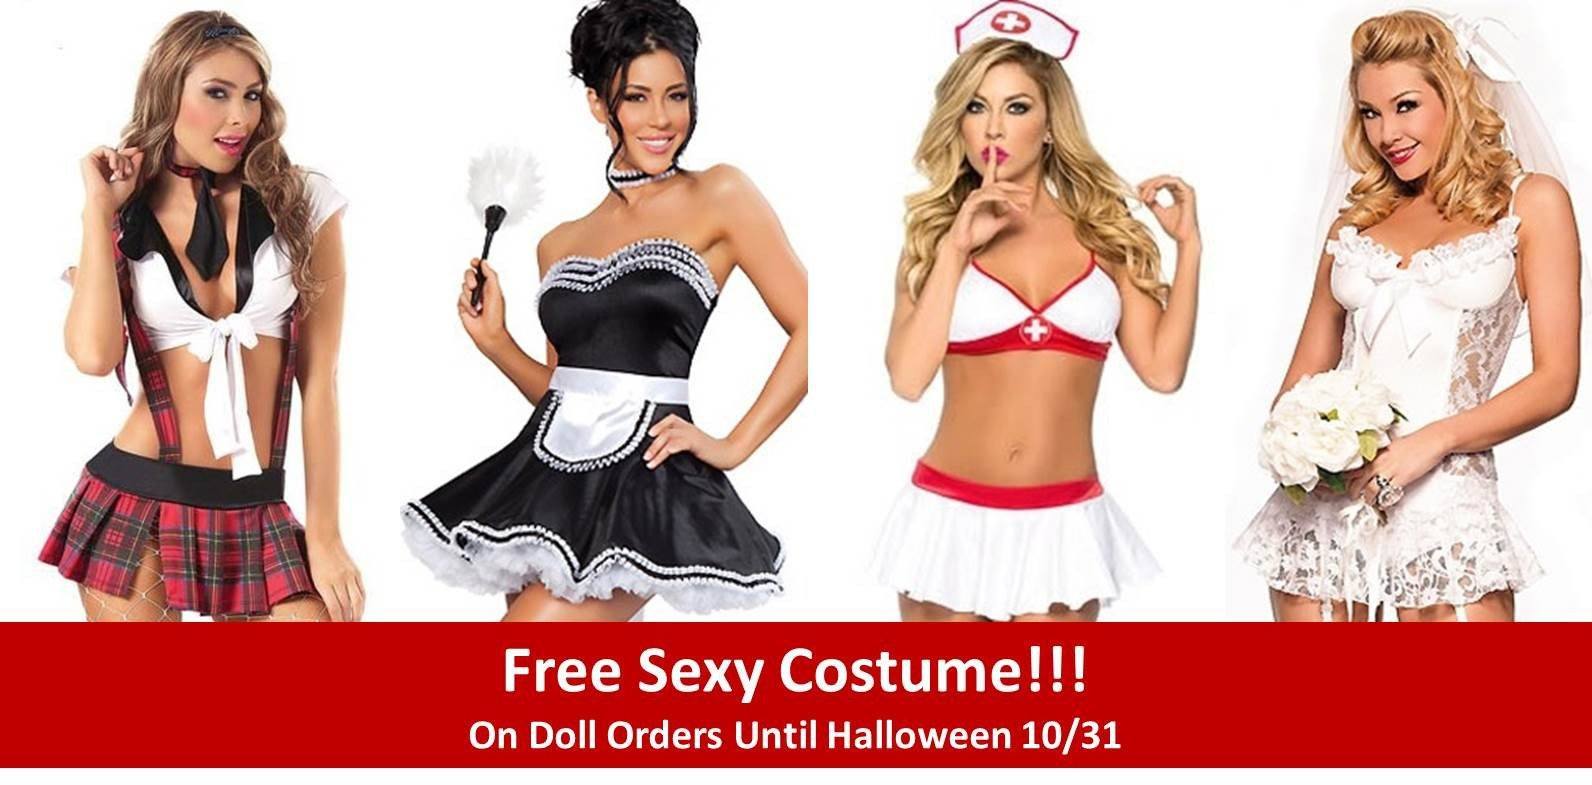 Only a FEW MORE HOURS! Free Sexy Costume until Halloween!!